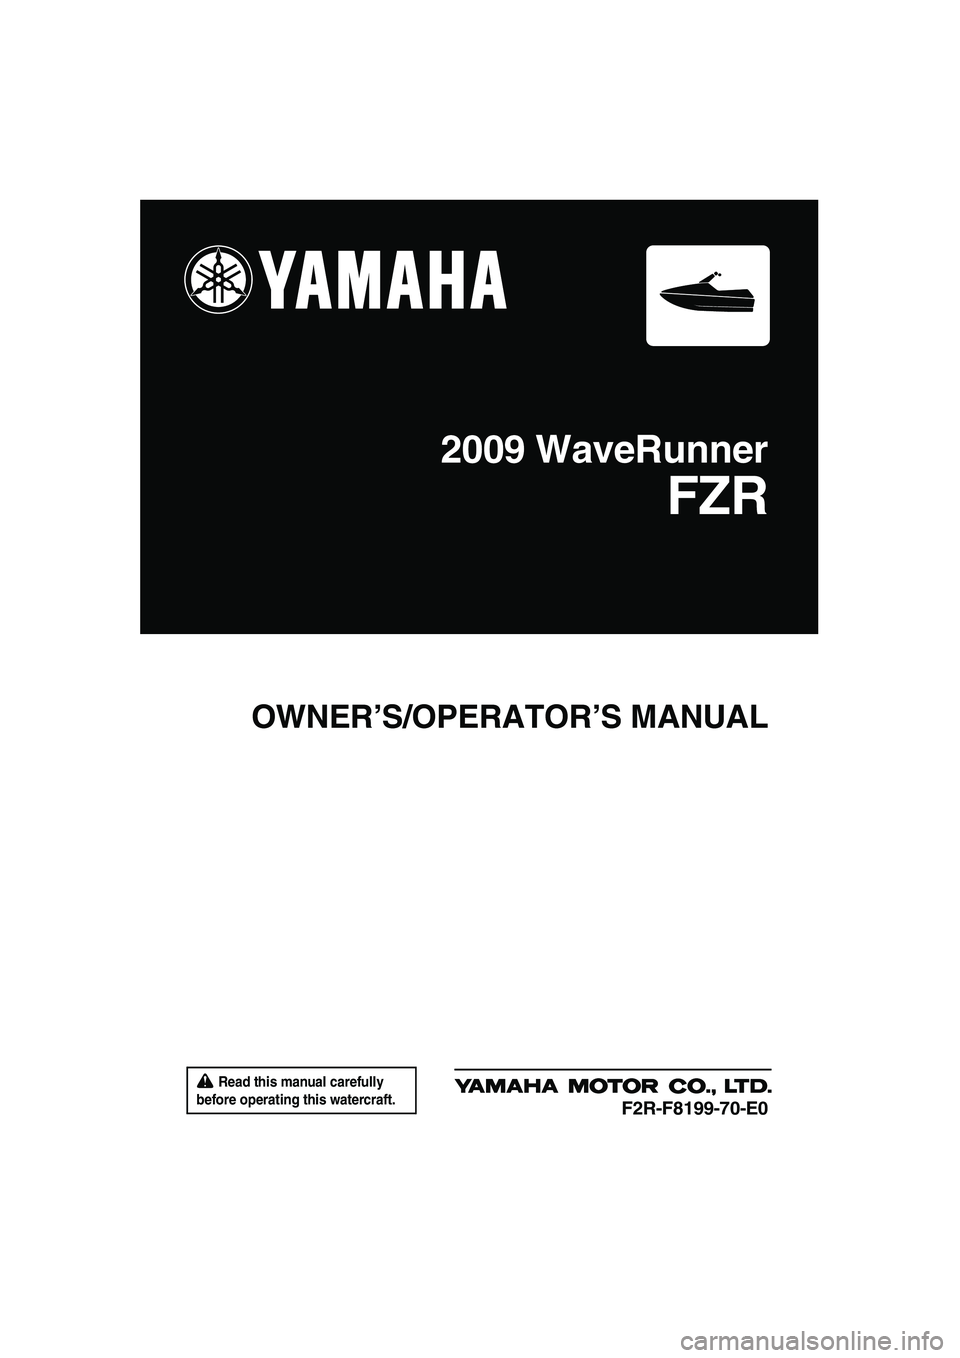 YAMAHA FZR 2009  Owners Manual  Read this manual carefully 
before operating this watercraft.
OWNER’S/OPERATOR’S MANUAL
2009 WaveRunner
FZR
F2R-F8199-70-E0
UF2R70E0.book  Page 1  Thursday, November 6, 2008  10:05 AM 